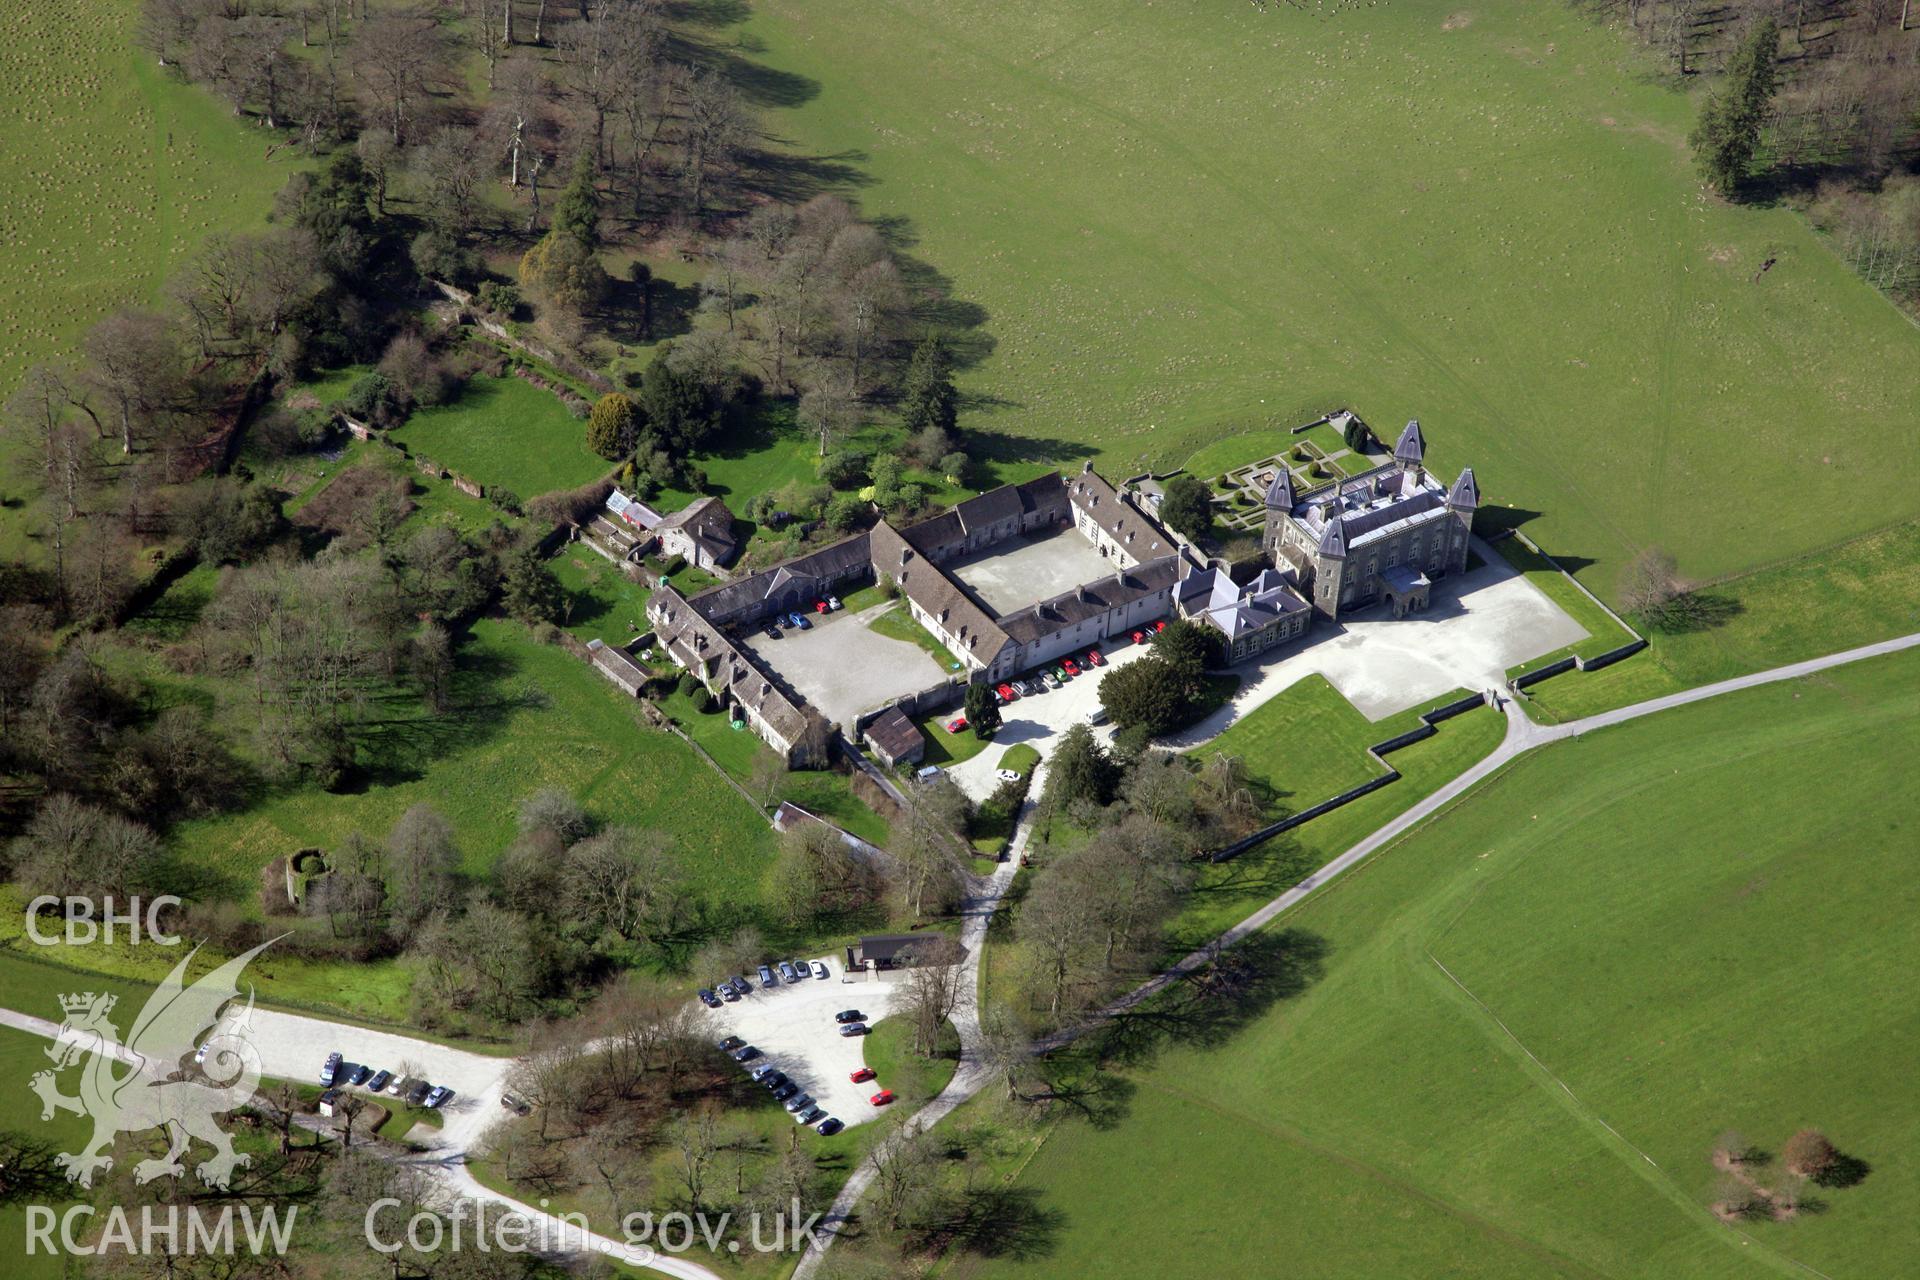 RCAHMW colour oblique photograph of Newton House, Dinefwr Park. Taken by Toby Driver and Oliver Davies on 28/03/2012.